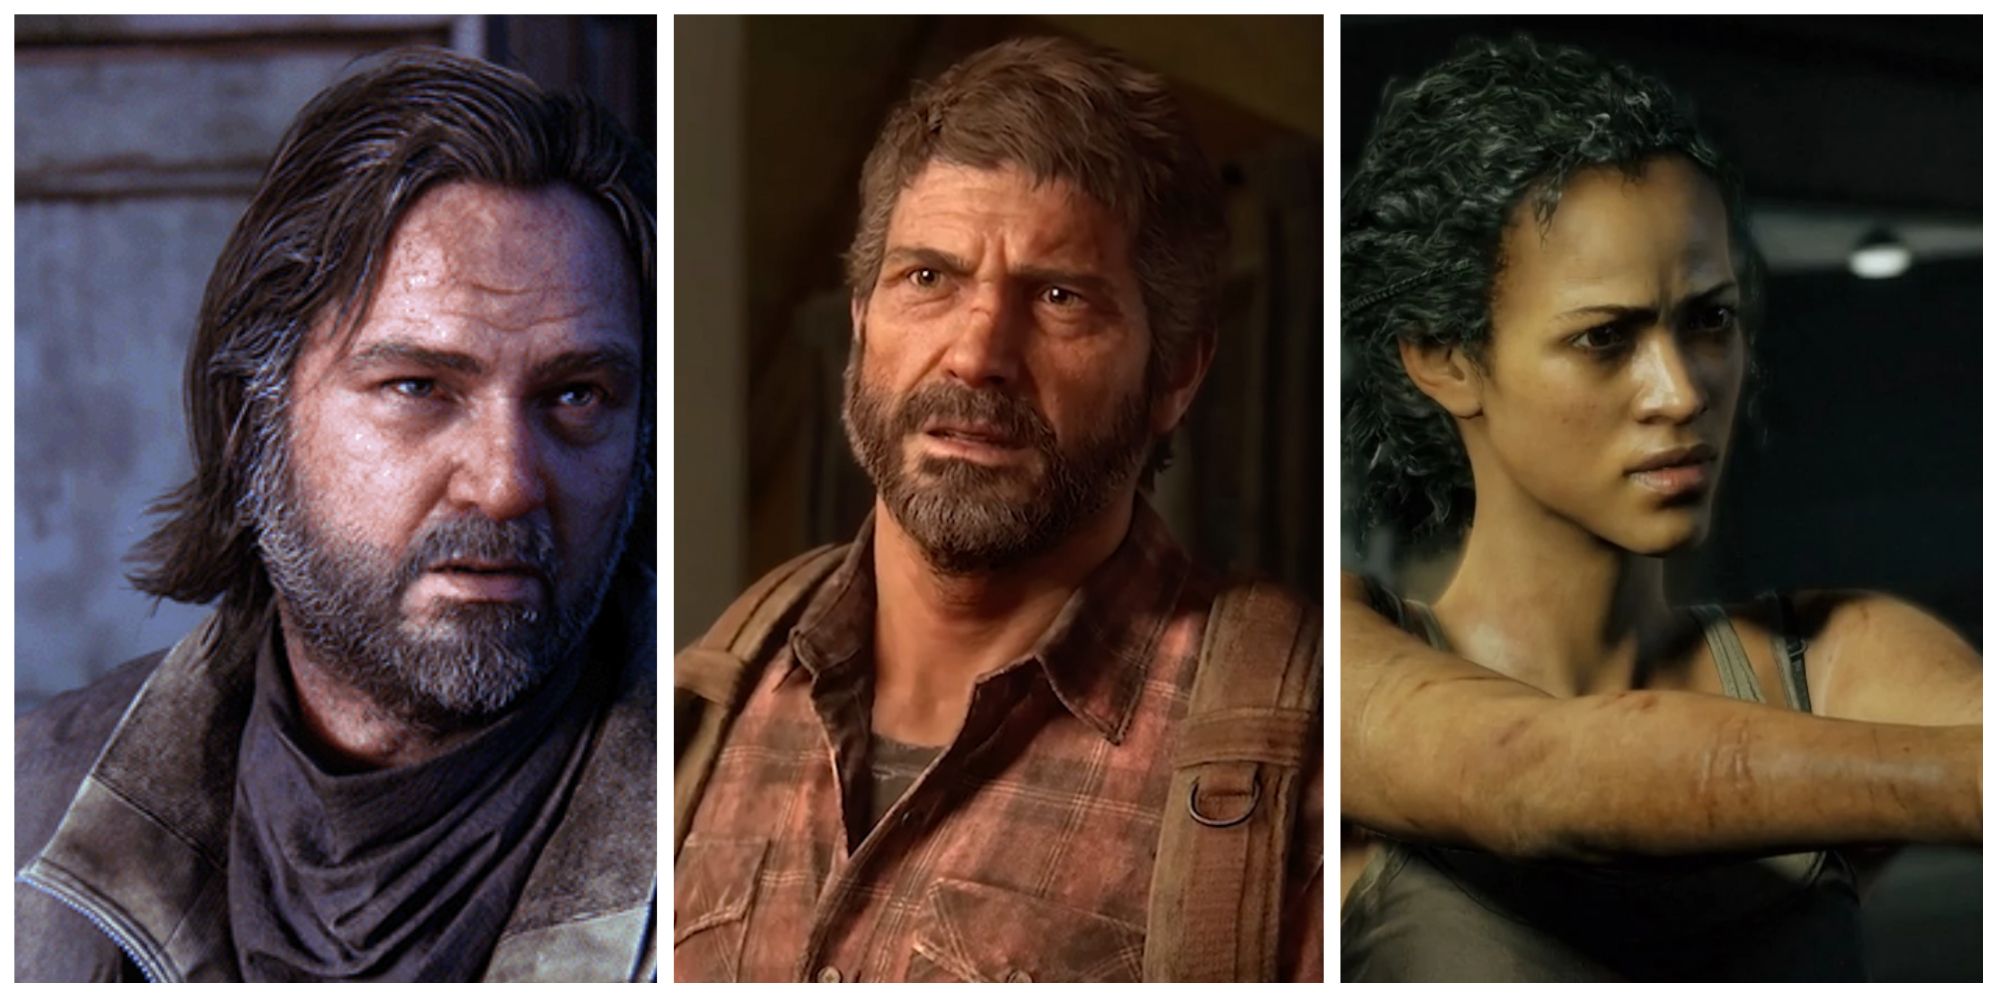 bill, joel and marlene from the last of us part 1